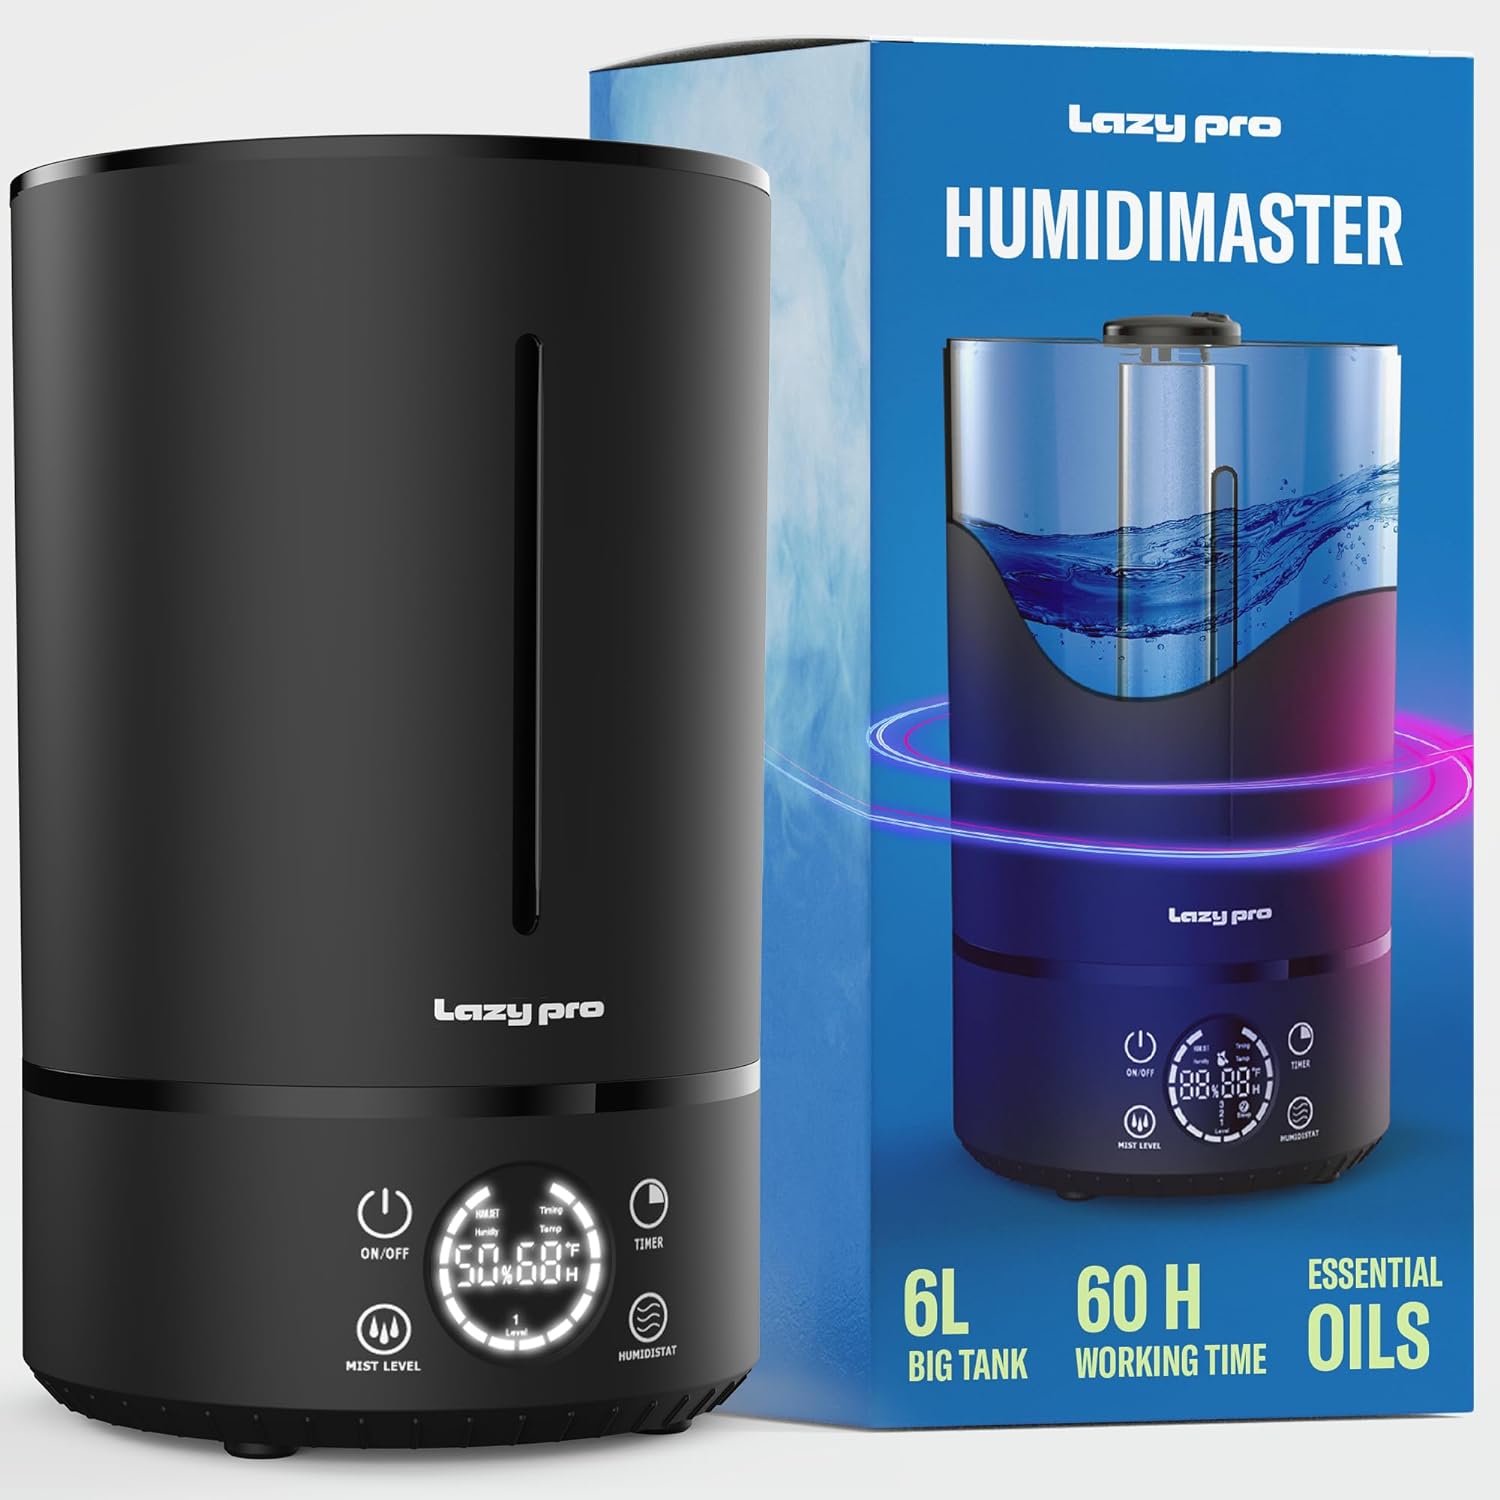 HUMIDIMASTER 6L Cool Mist Humidifiers for Bedroom Large Rooms, Small Humidifier 1.6 Gallon Top Fill Ultrasonic Humidifier, Quiet Effective for Home - 60 hours, 360 for Babies, Essential Oils Diffuser